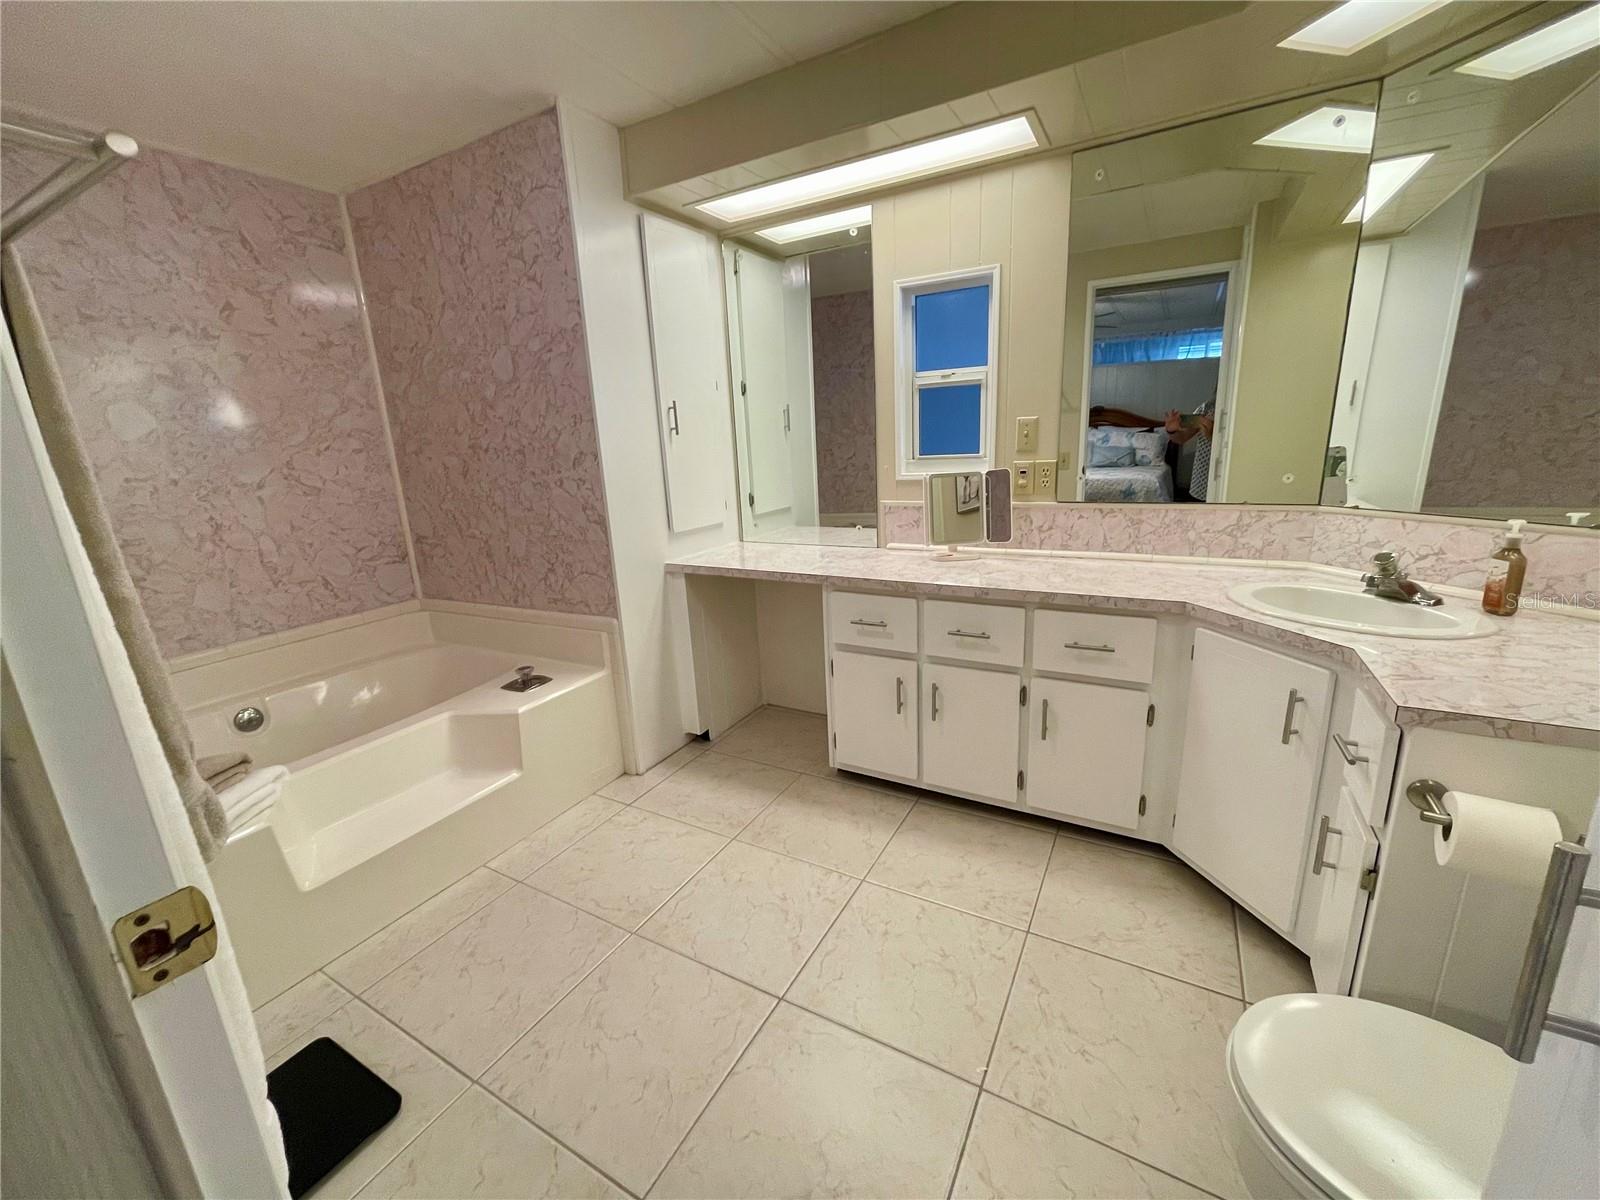 Large ensuite bath, garden tub and ample amount of cabinetry/storage here